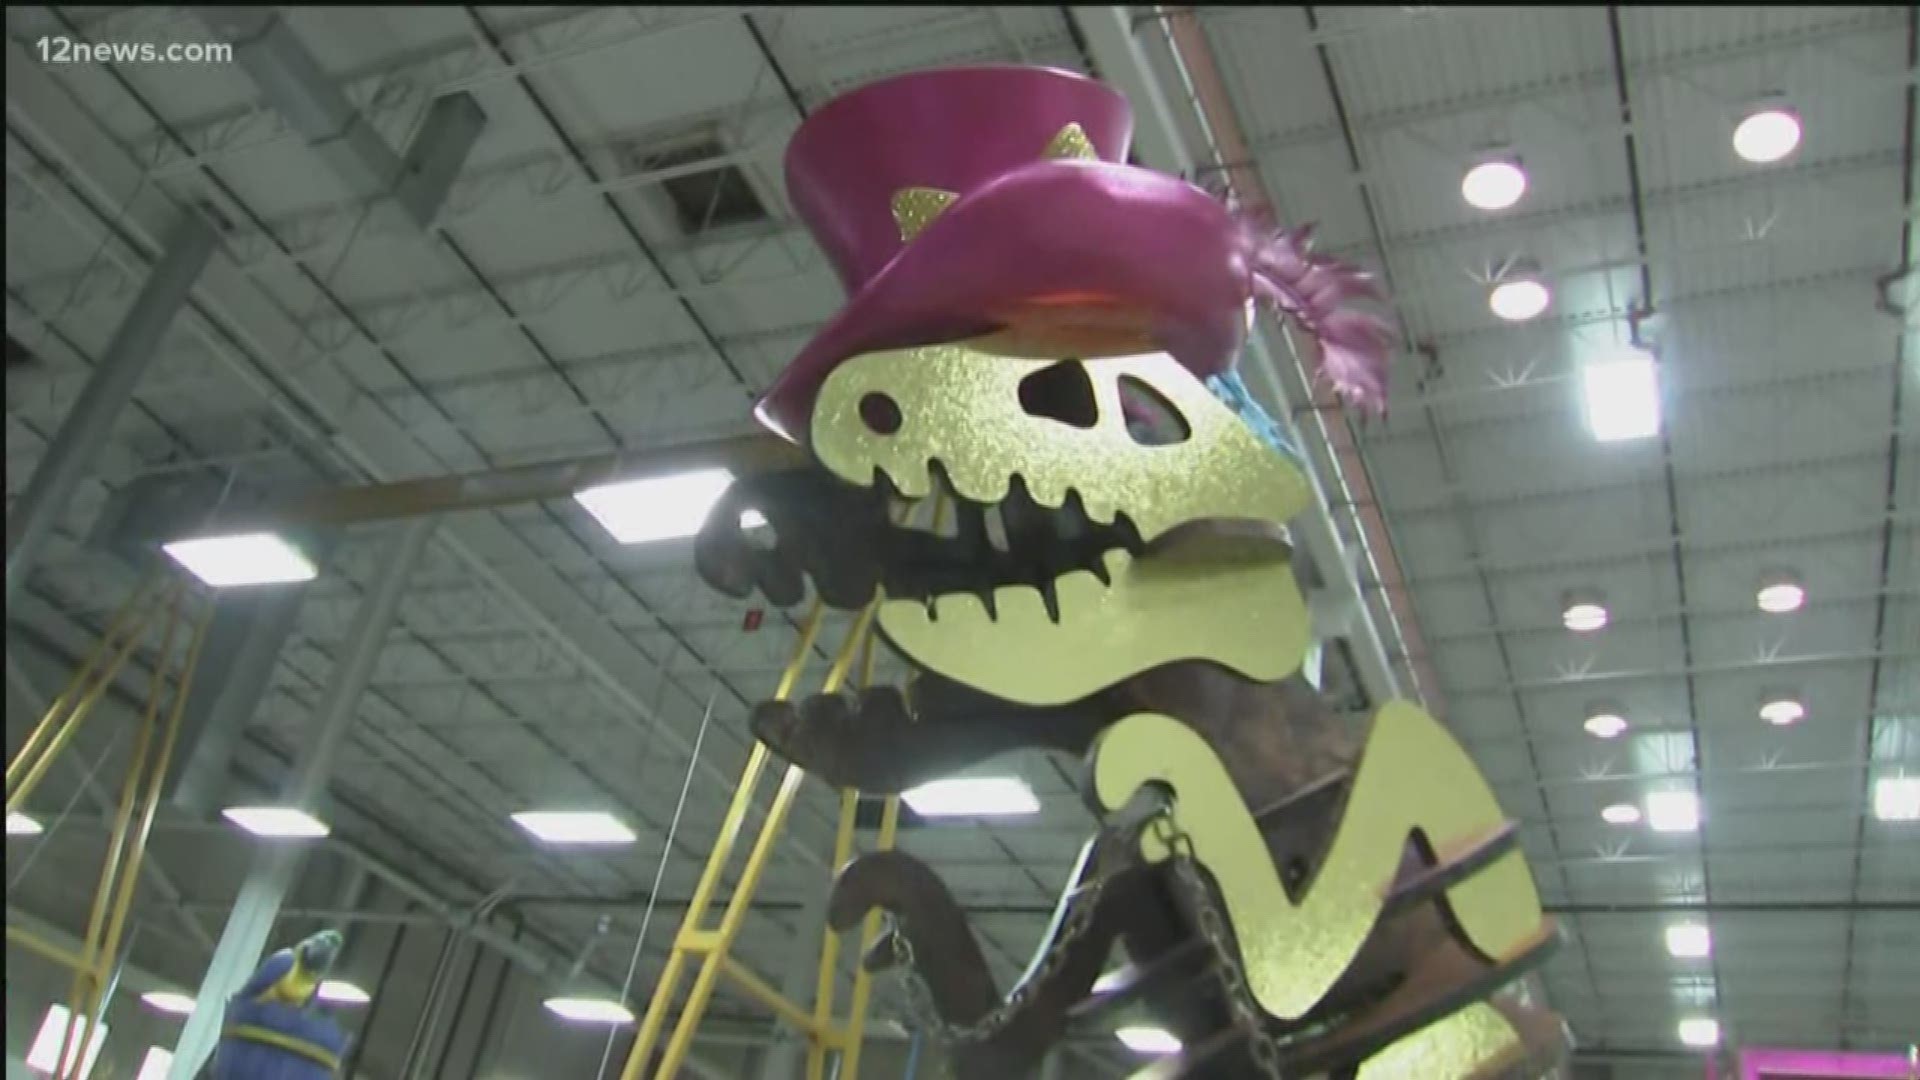 Watching the Macy's Thanksgiving Day Parade is one of the holiday's longest traditions and we take you behind the scenes to check out this year's newest floats.